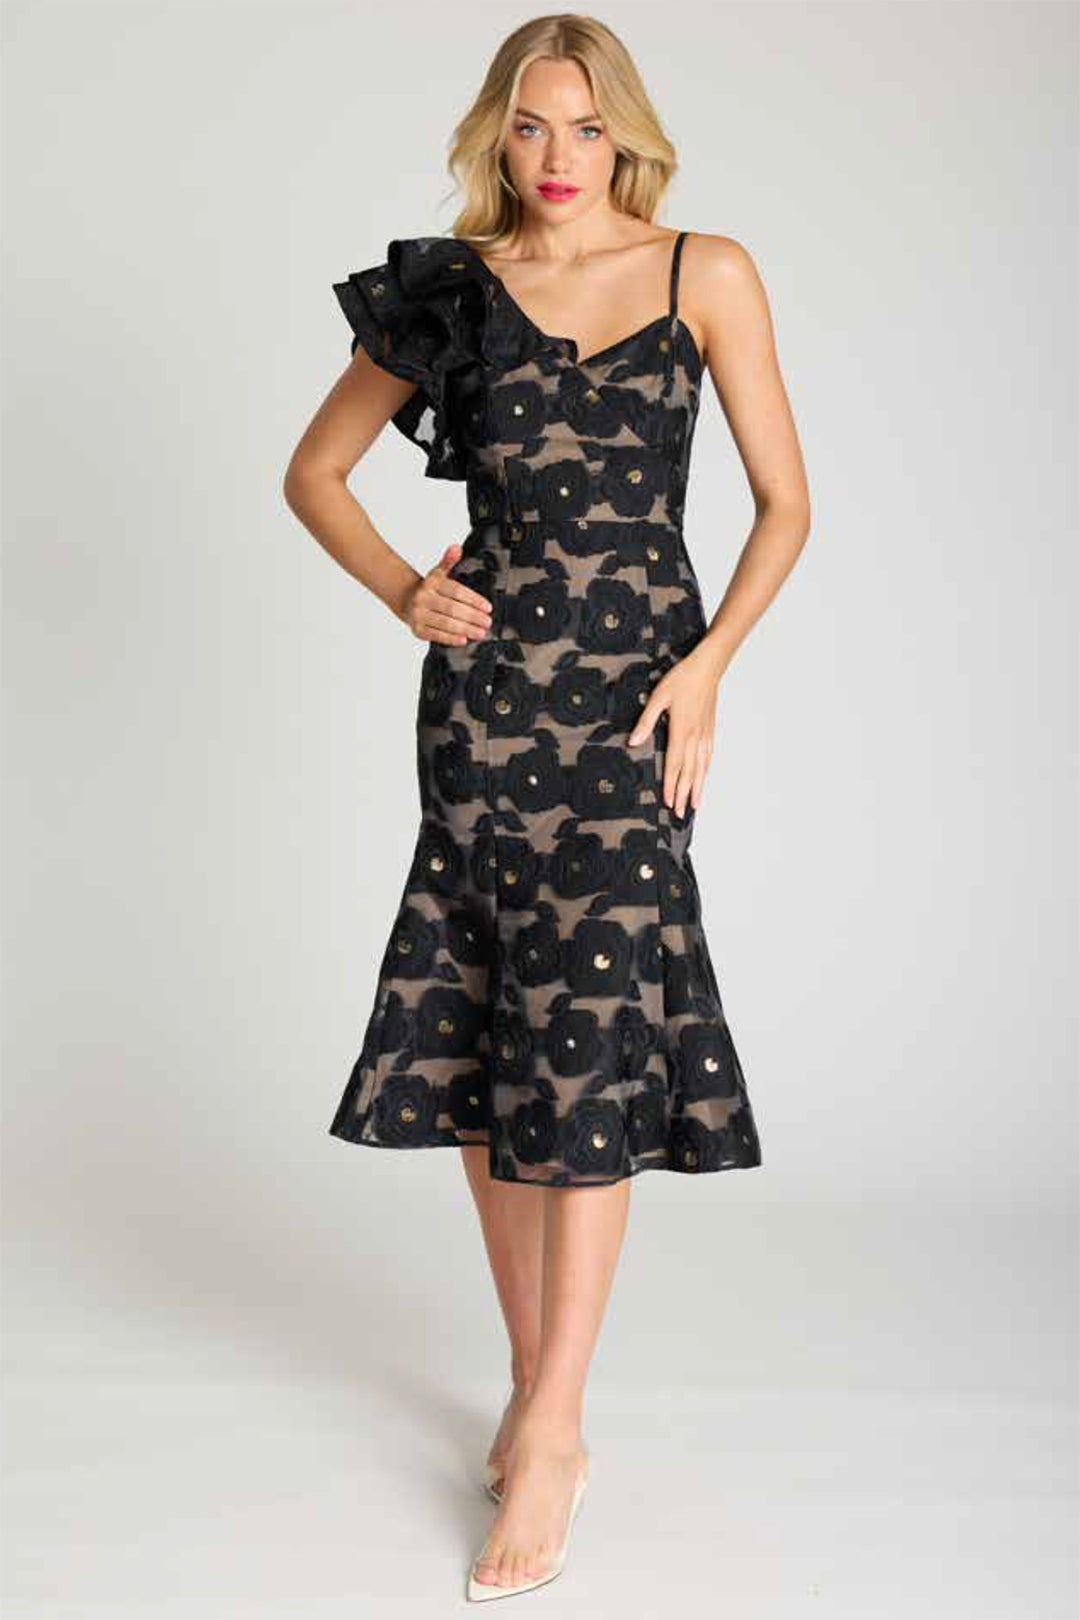 One shoulder layered sleeve midi length with a slight flared hem, lace with black flower detailing designed by Romance and sold by Pizazz Boutique ladies clothing Nelson Bay dress shops